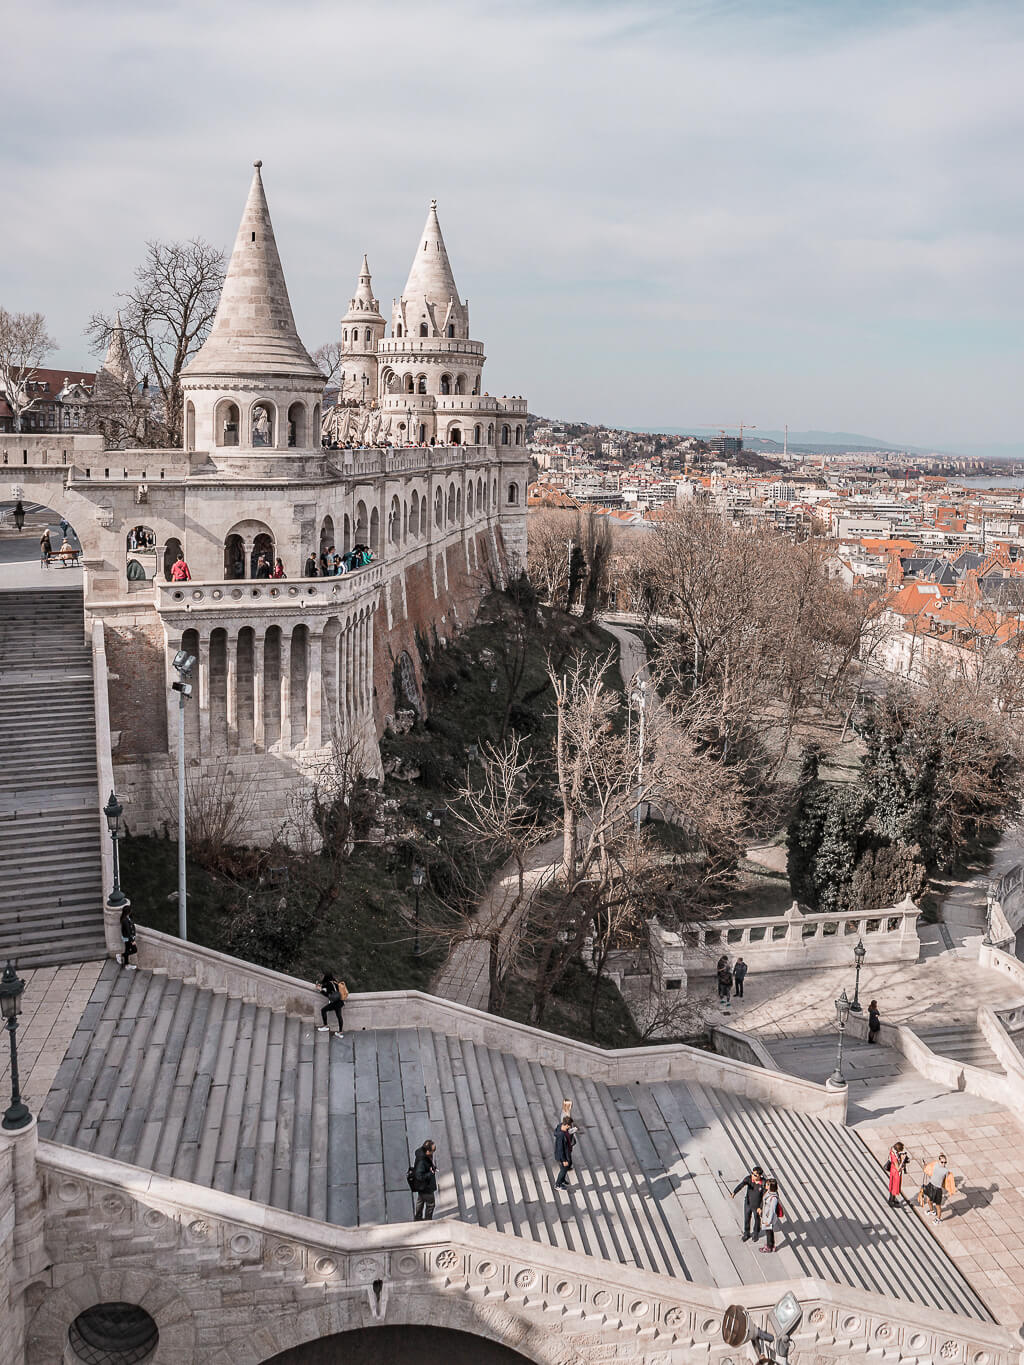 20 Photos to Inspire You to Visit Budapest, Hungary | Fisherman's Bastion